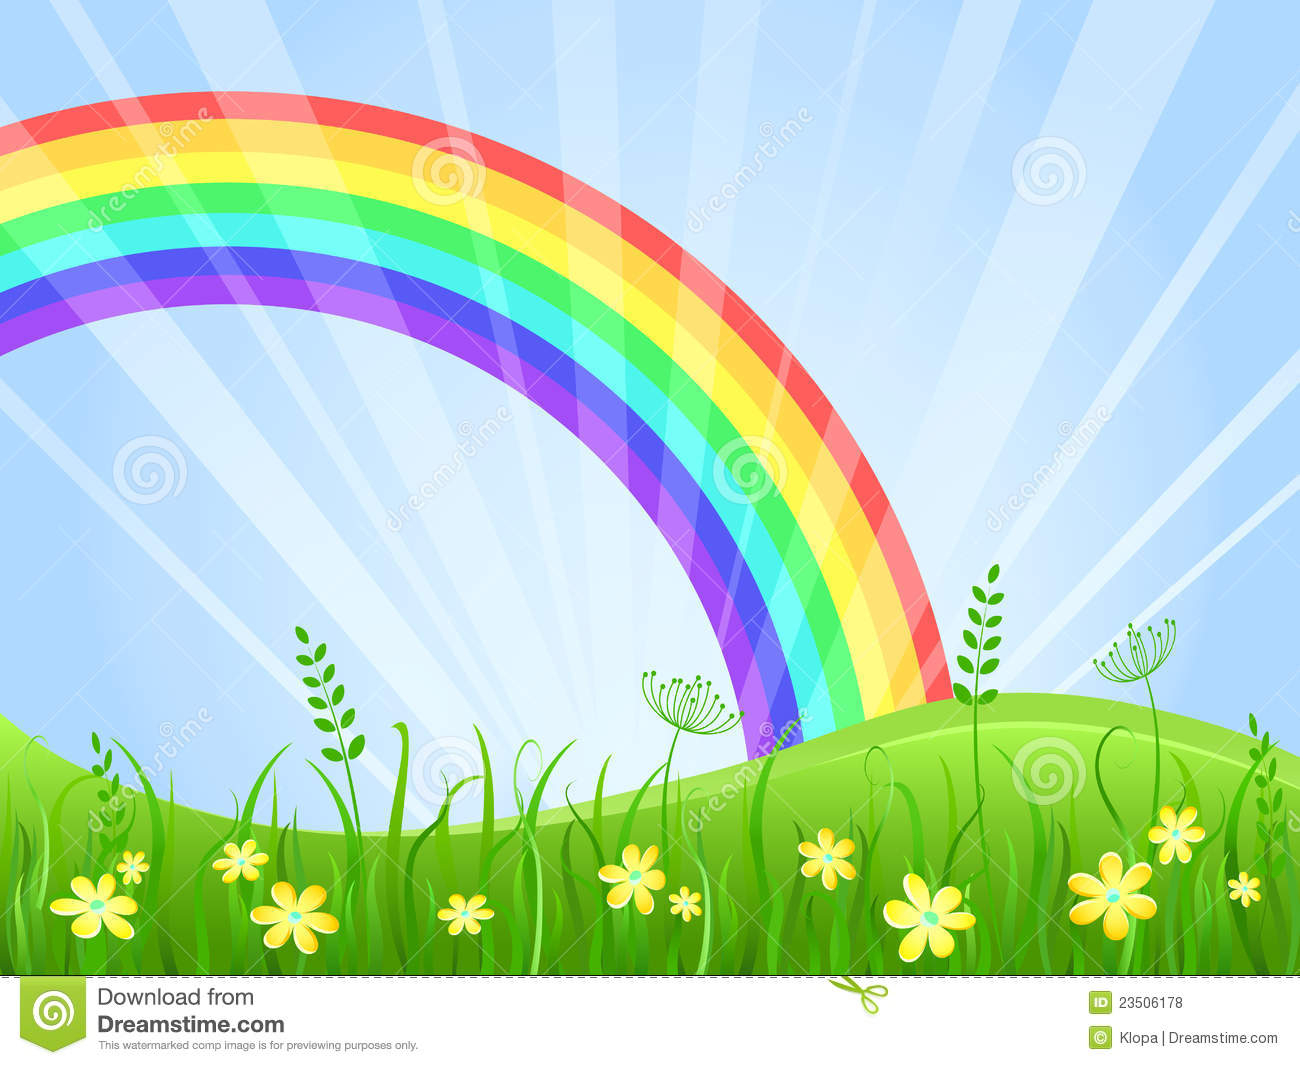 Meadow With Flowers And Rainbow Royalty Free Stock Photos   Image